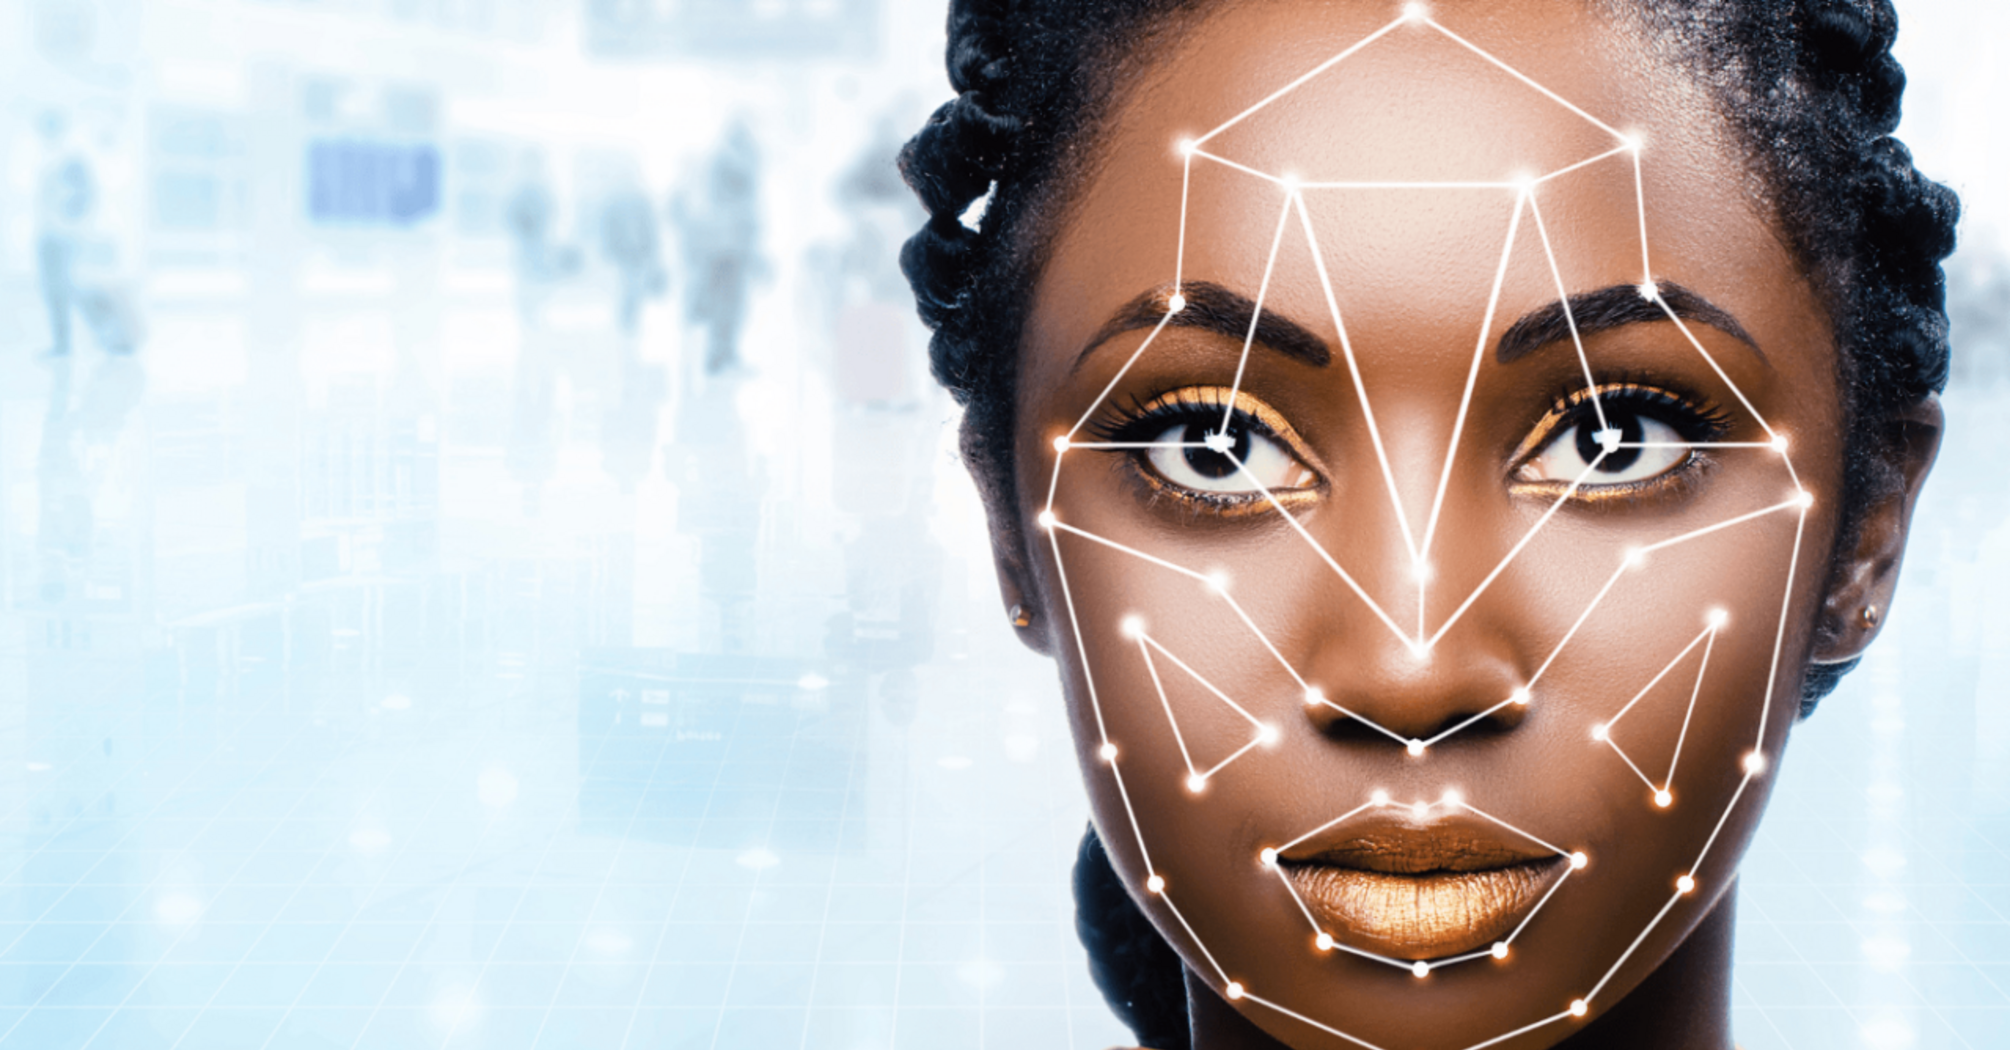 How face recognition technology works